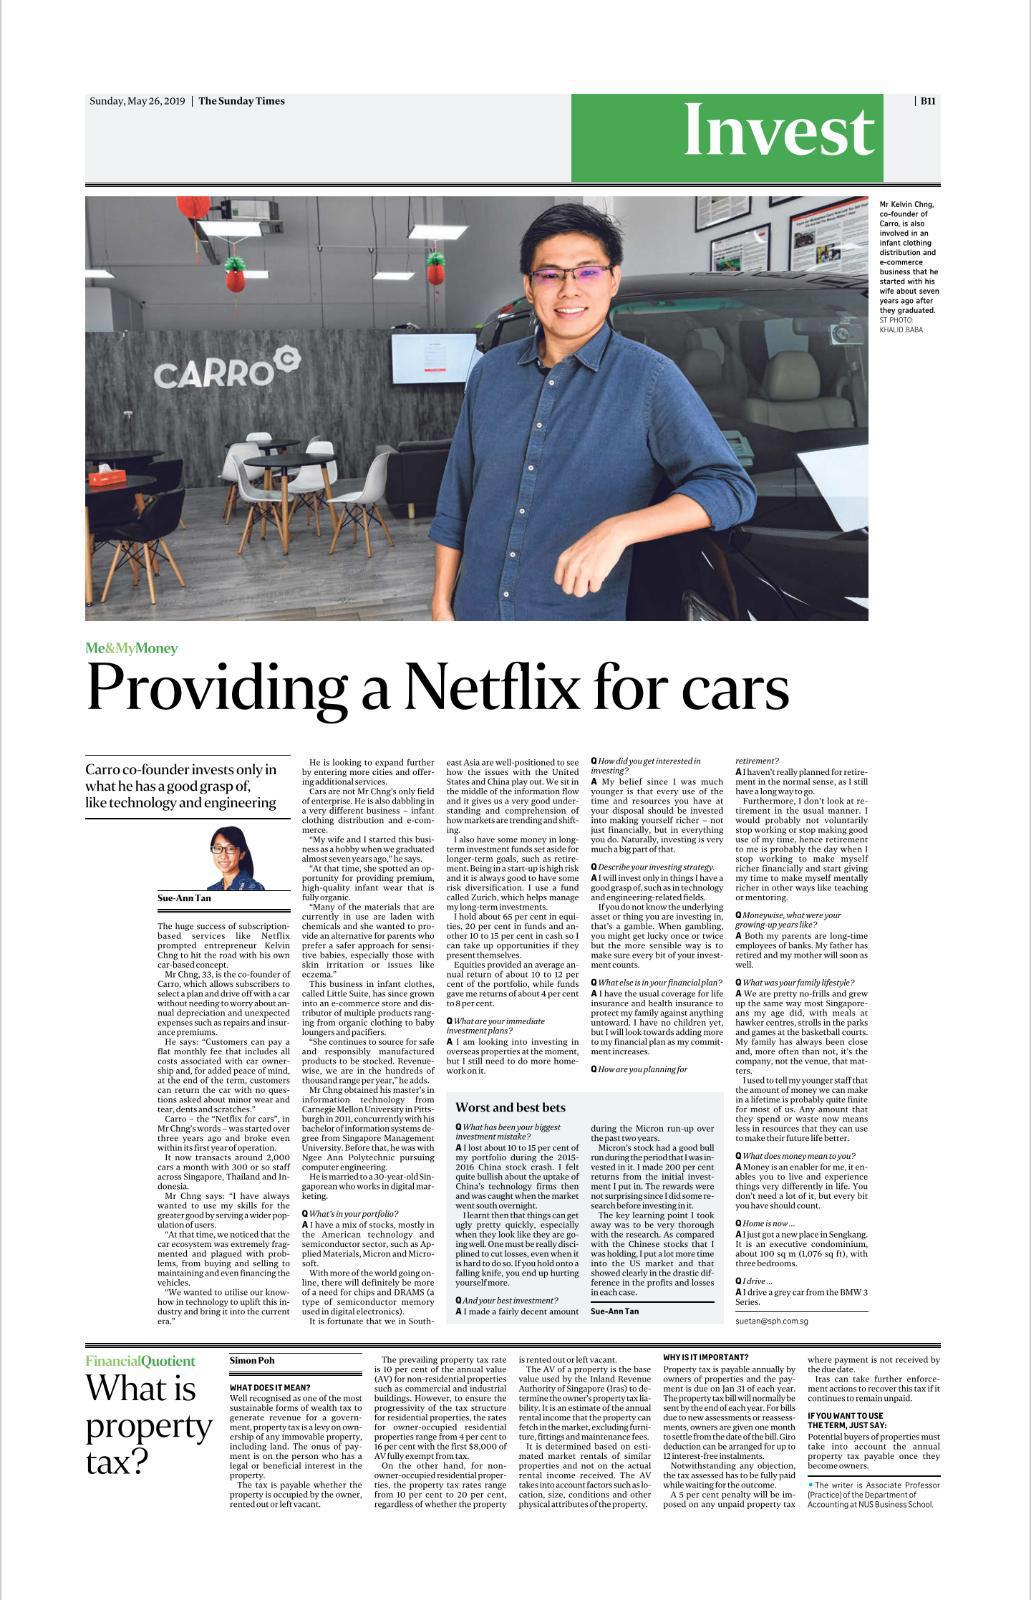 The Sunday Times: Providing a Netflix for Cars